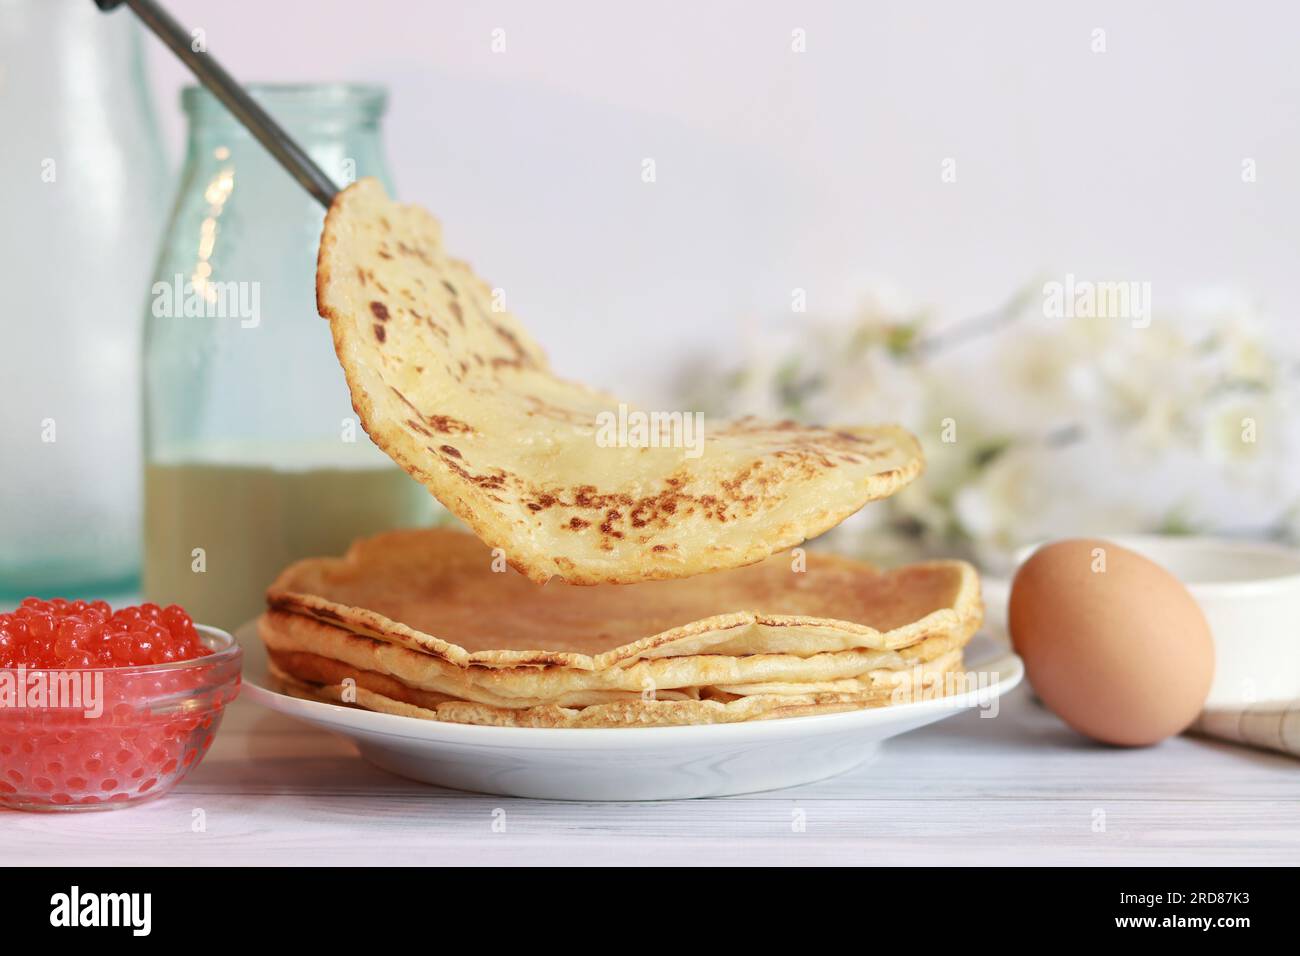 images Alamy photography Ready and stock hi-res - pancakes made